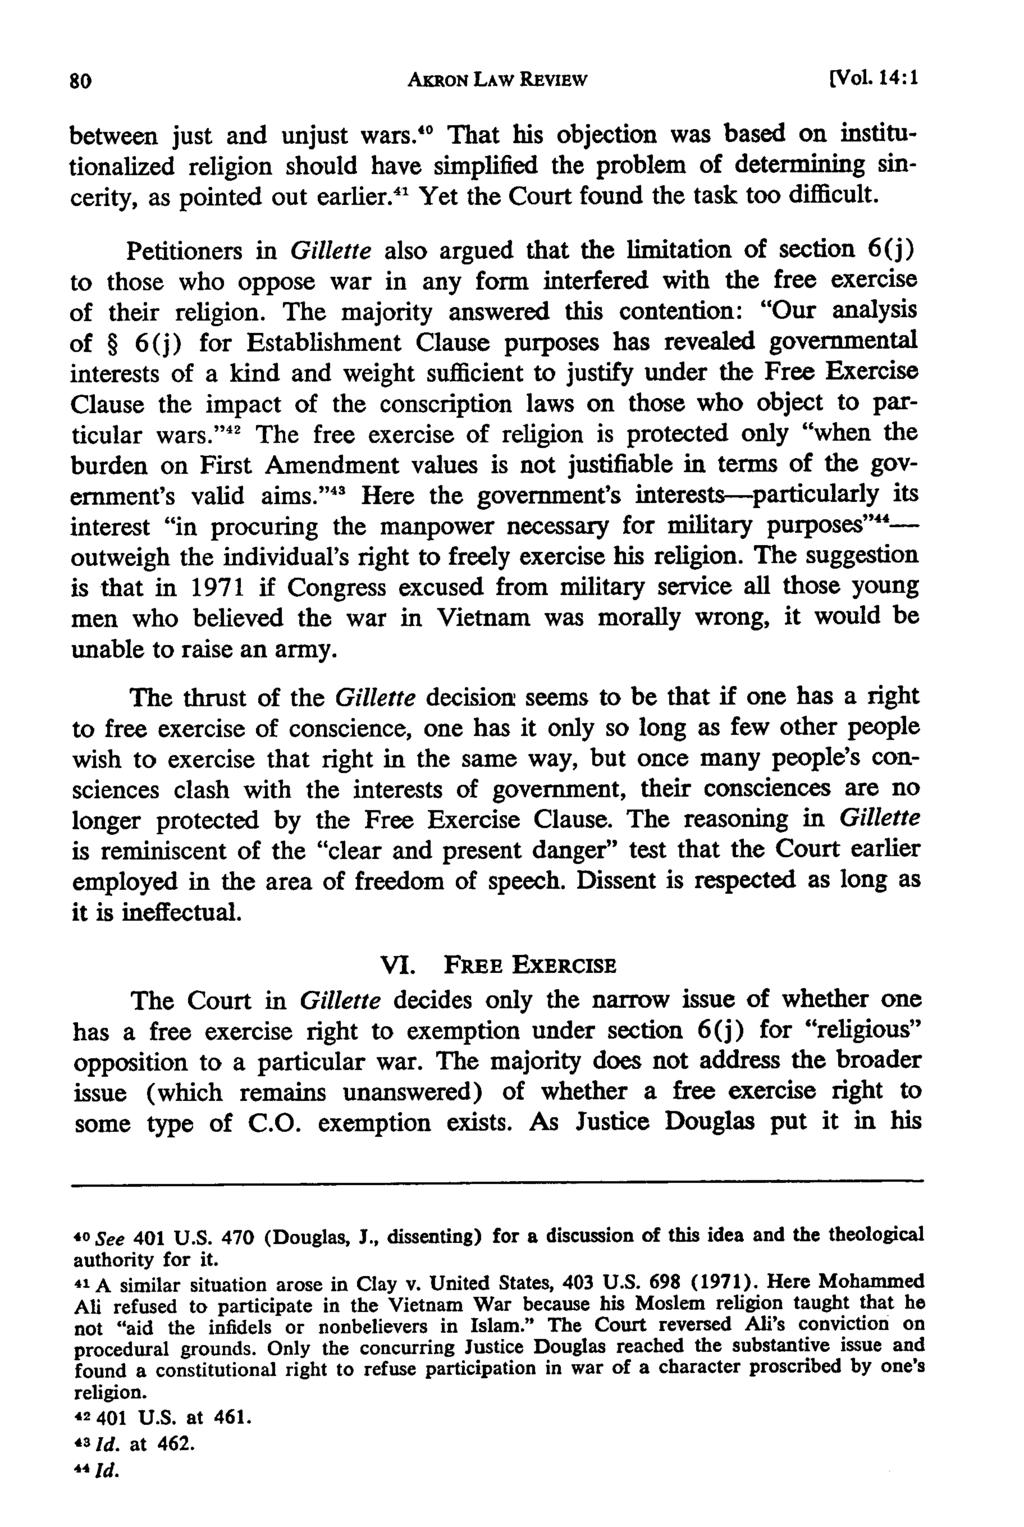 Akron Law Review, Vol. 14 [1981], Iss. 1, Art. 6 AKRON LAW REVIEW [Vol. 14:1 between just and unjust wars.